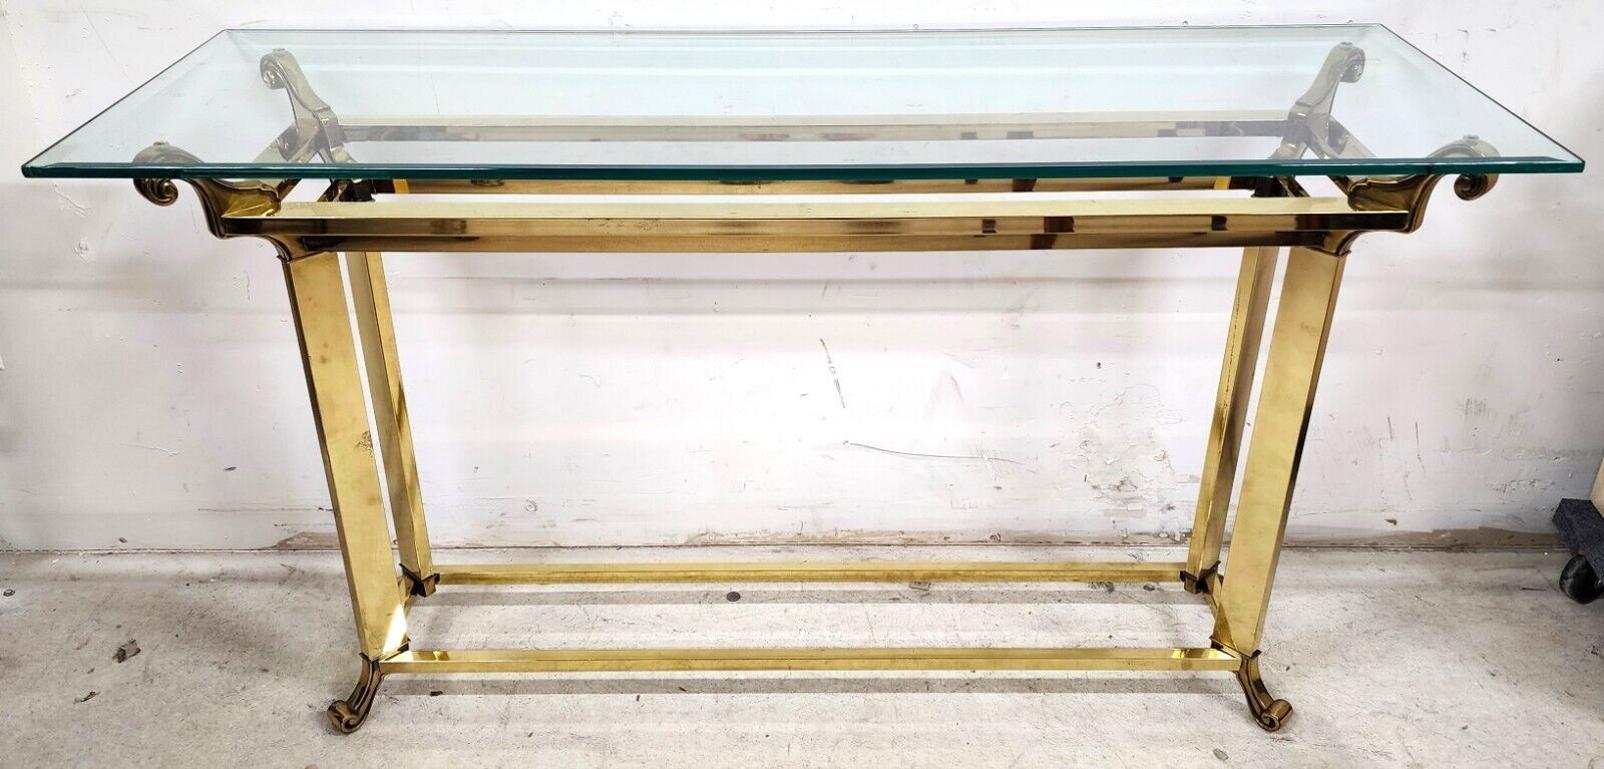 For FULL item description click on CONTINUE READING at the bottom of this page.

Offering One Of Our Recent Palm Beach Estate Fine Furniture Acquisitions Of A 
Vintage Mastercraft Style Glass & Brass Console Table in The Art Deco Hollywood Regency